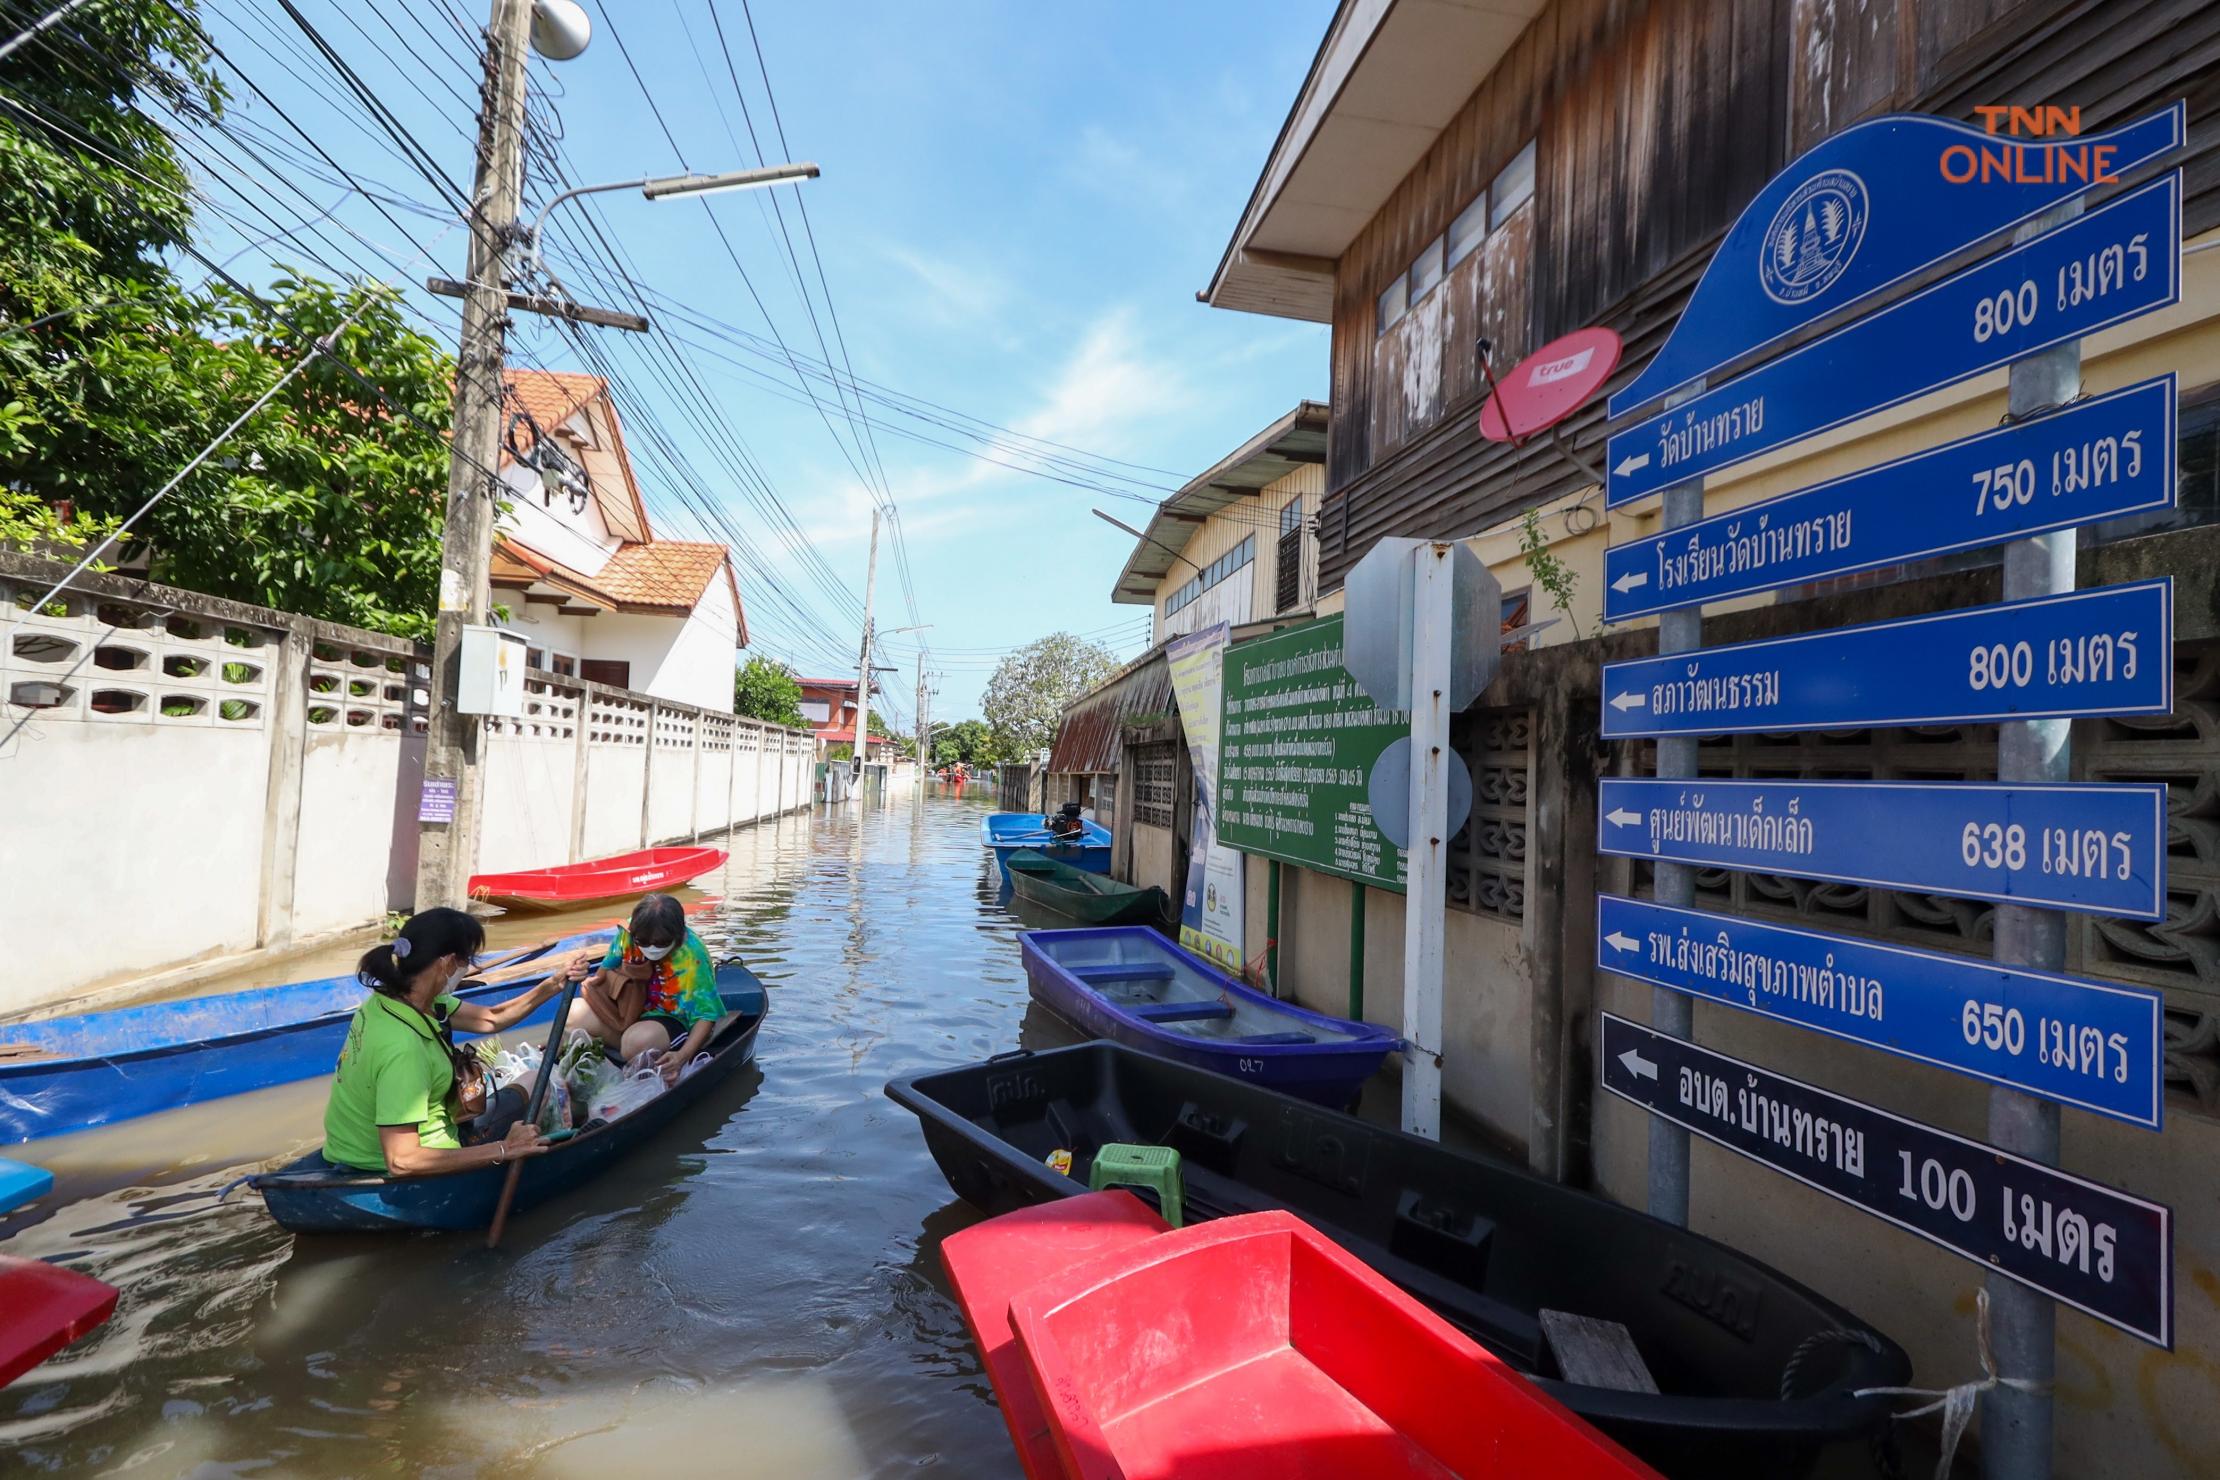 Residents of the flooded areas using boats for tranportation